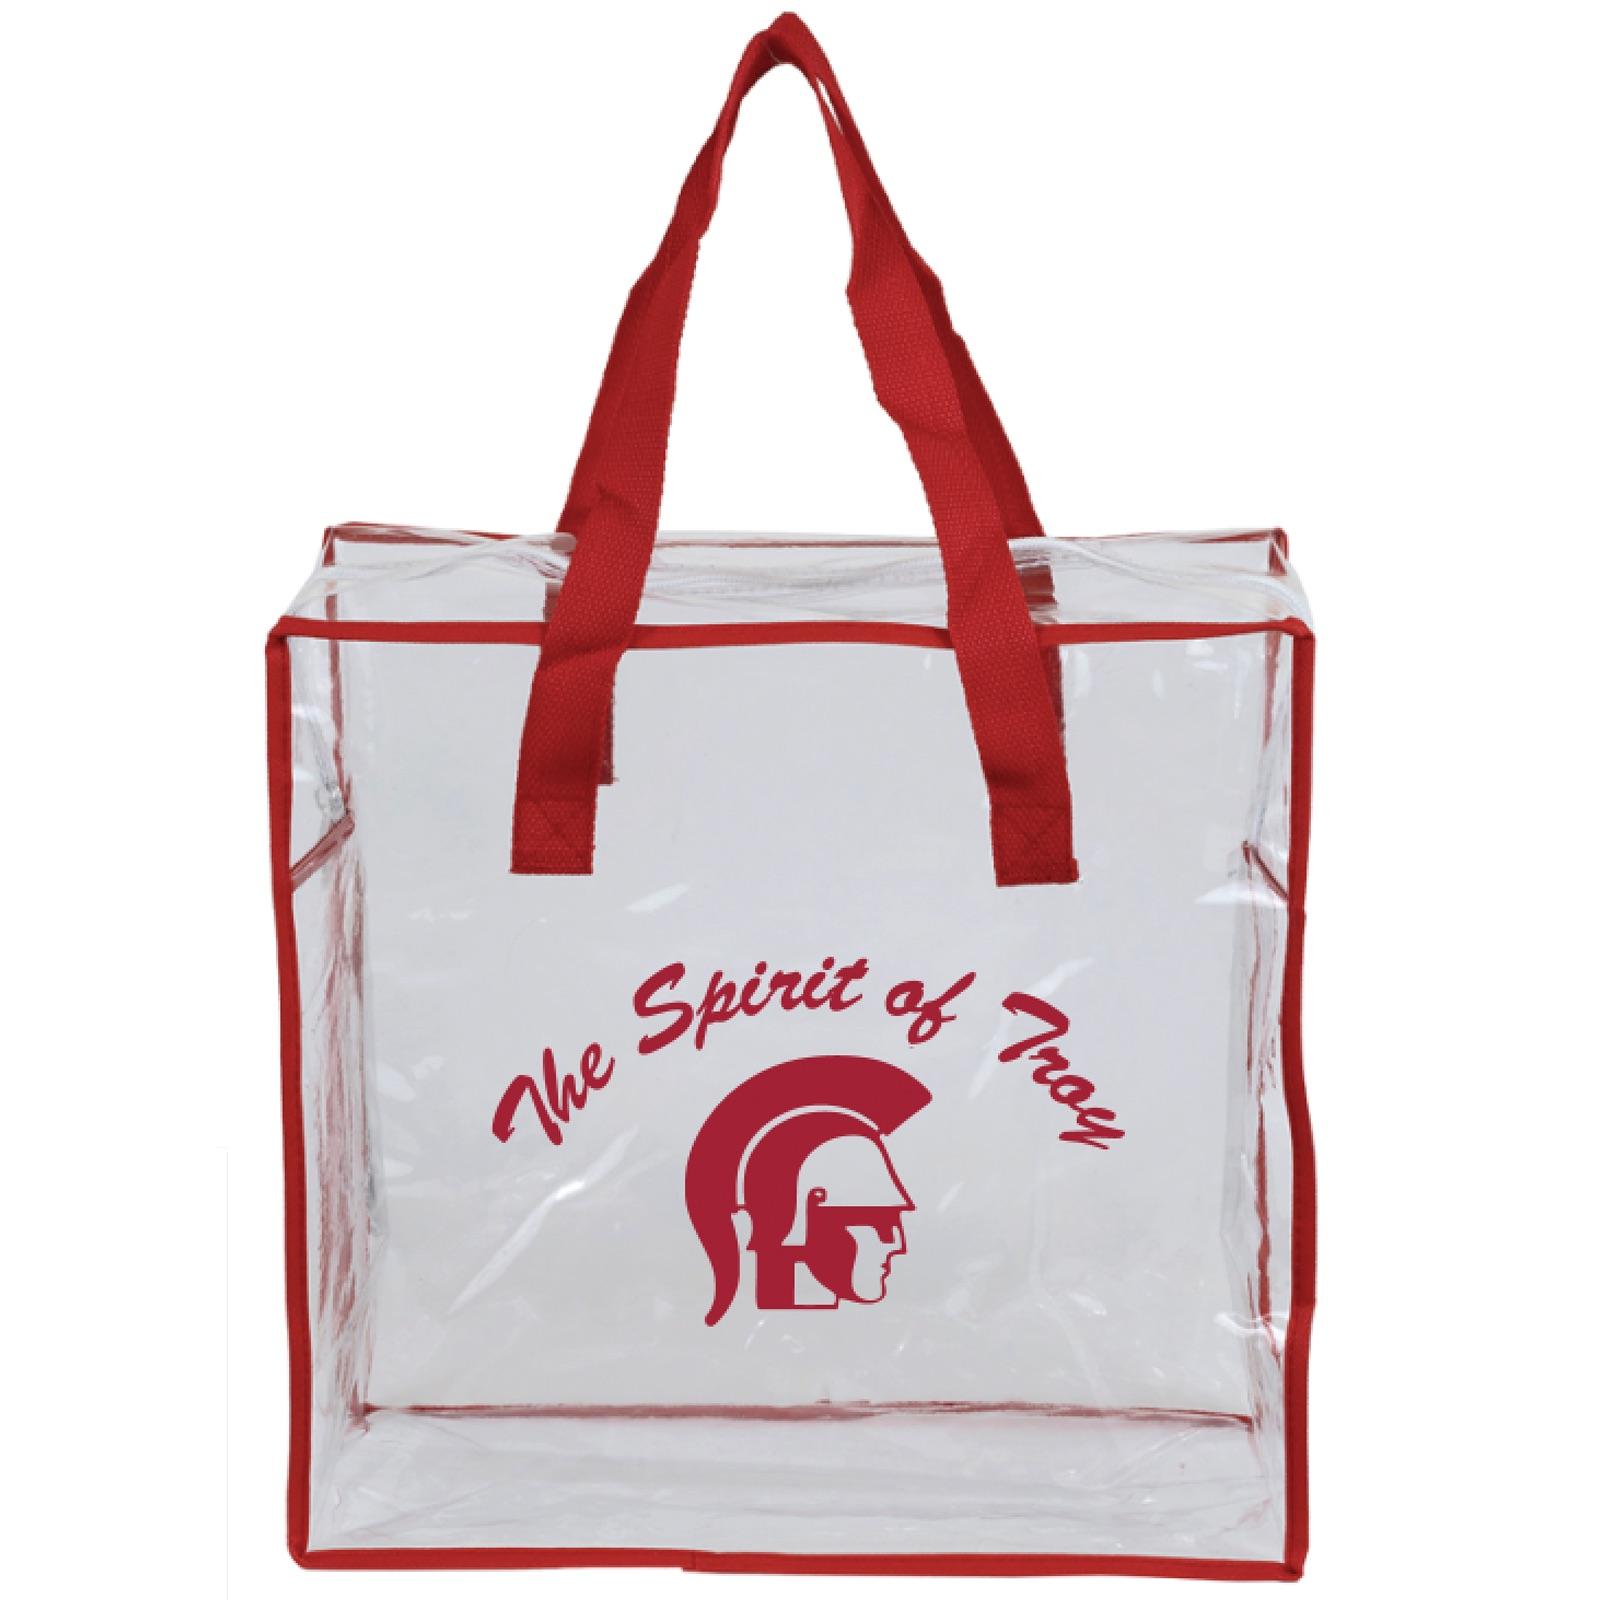 Spirit of Troy Cardinal Band Head Clear Bag image01